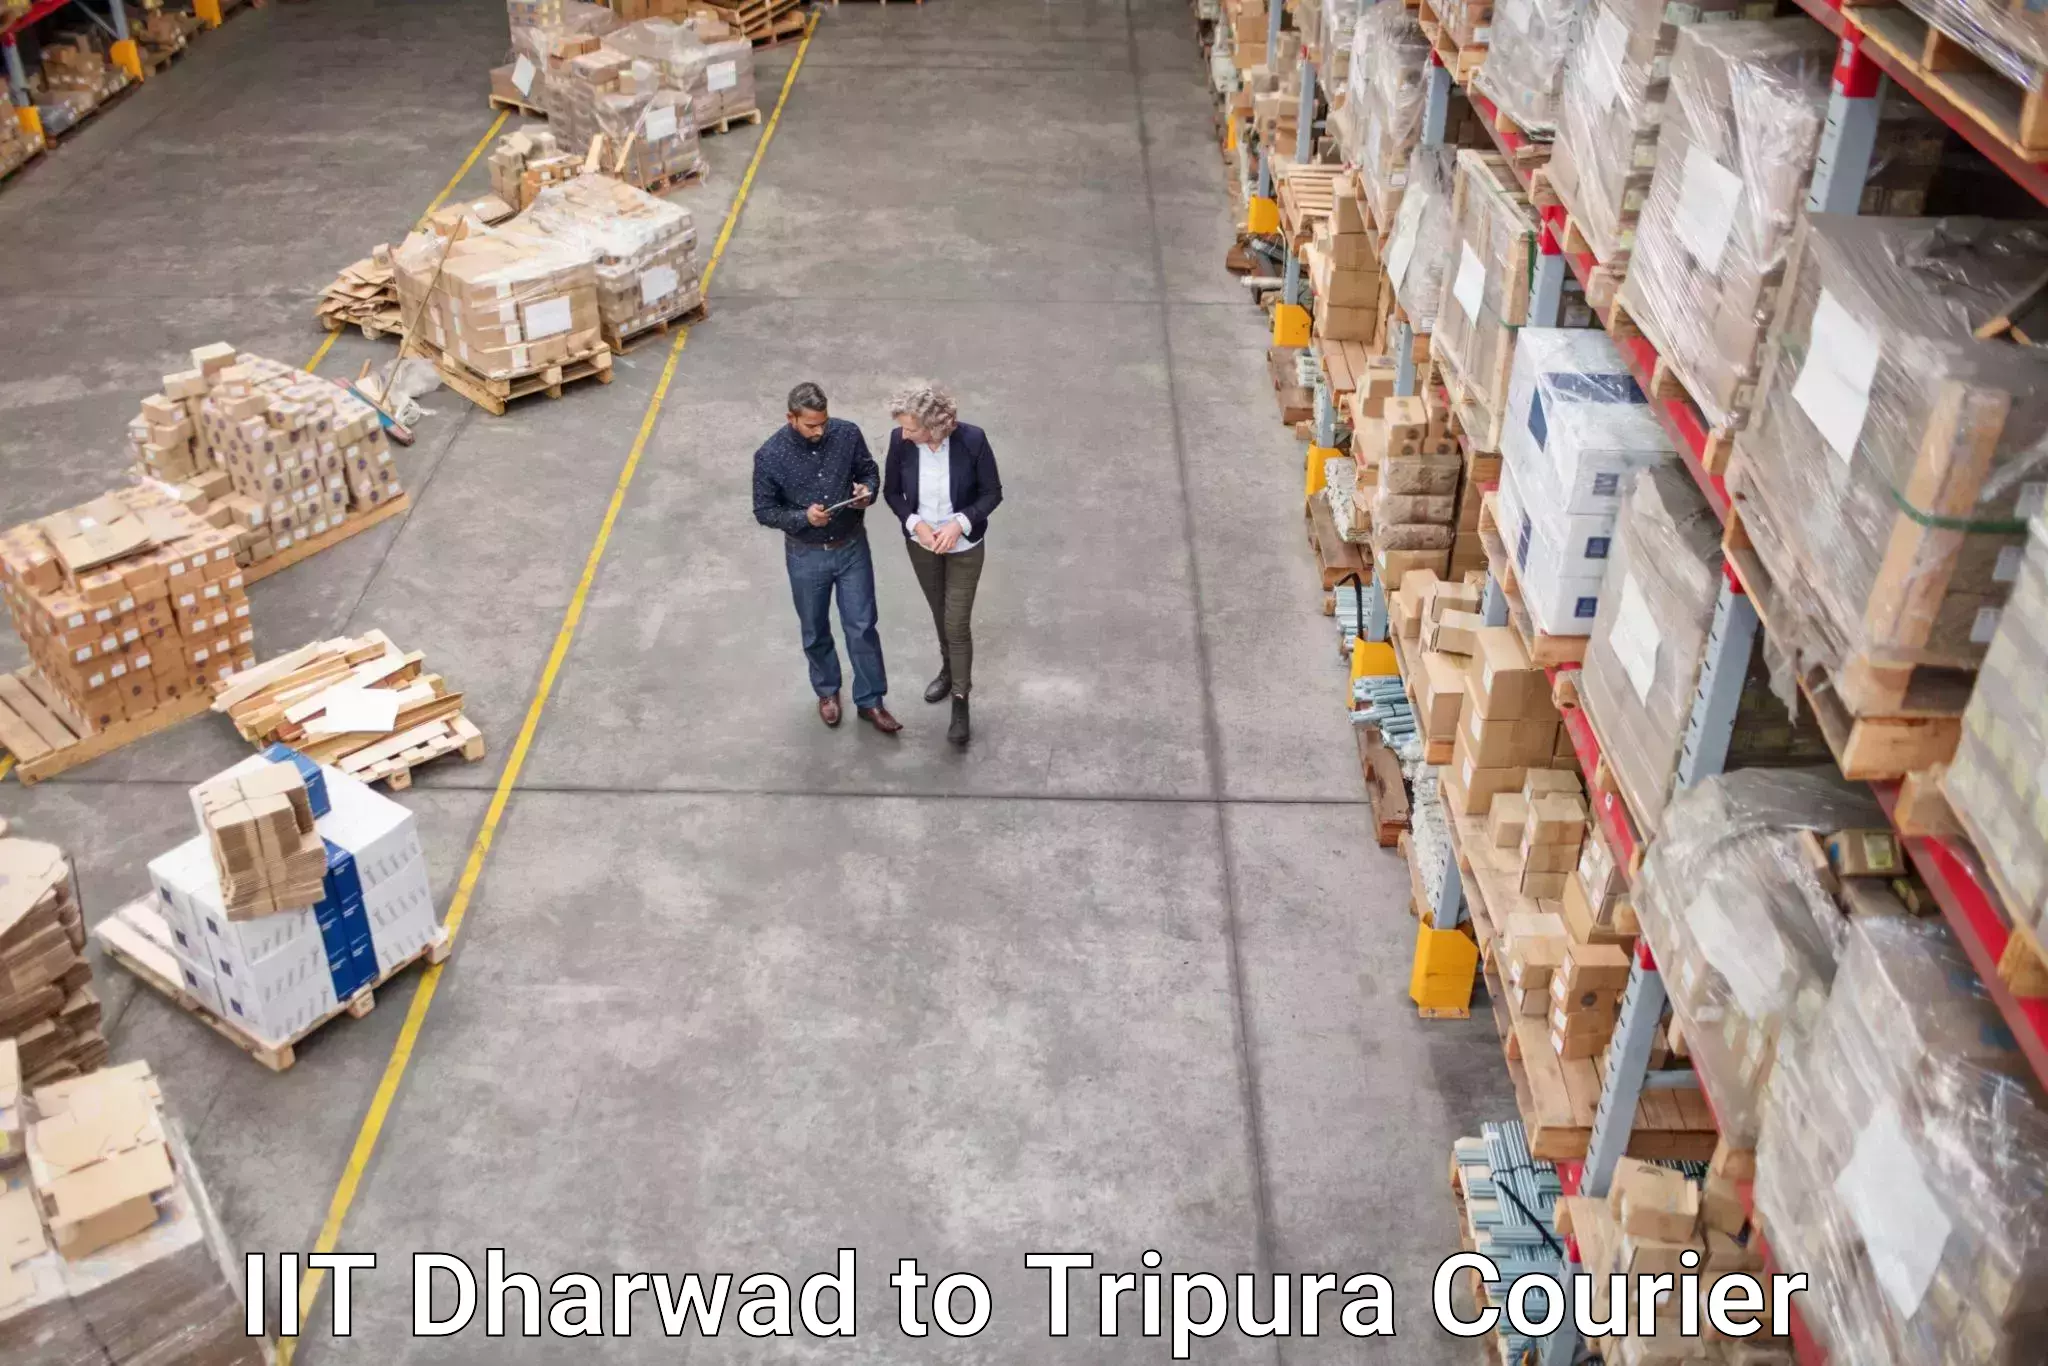 Next-day freight services IIT Dharwad to Udaipur Tripura